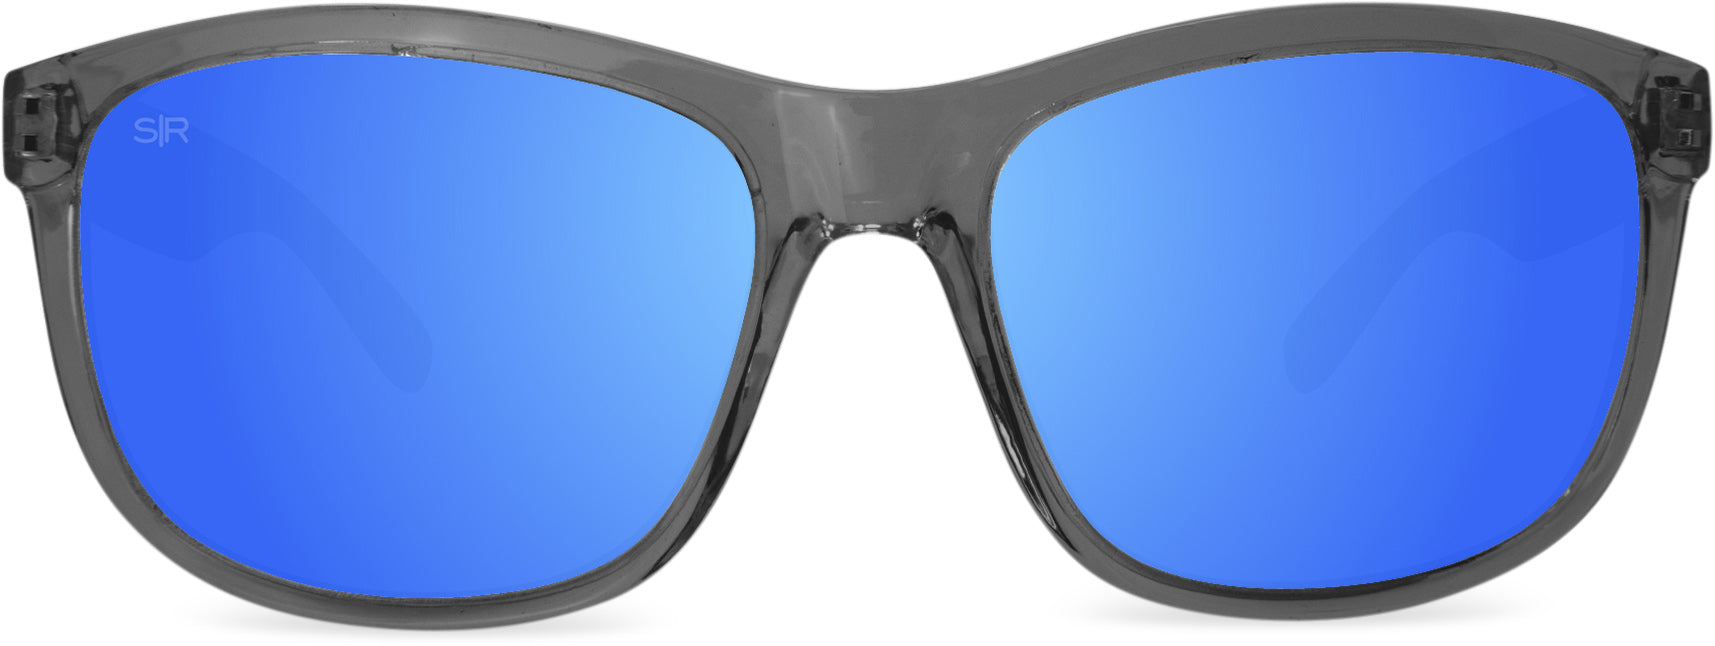 Signature Series - Glacier Smoke Original Polarized Sunglasses | Gloss Sunglasses | Best Christmas Gifts | Gifts for The Holidays | Unique Gifts for